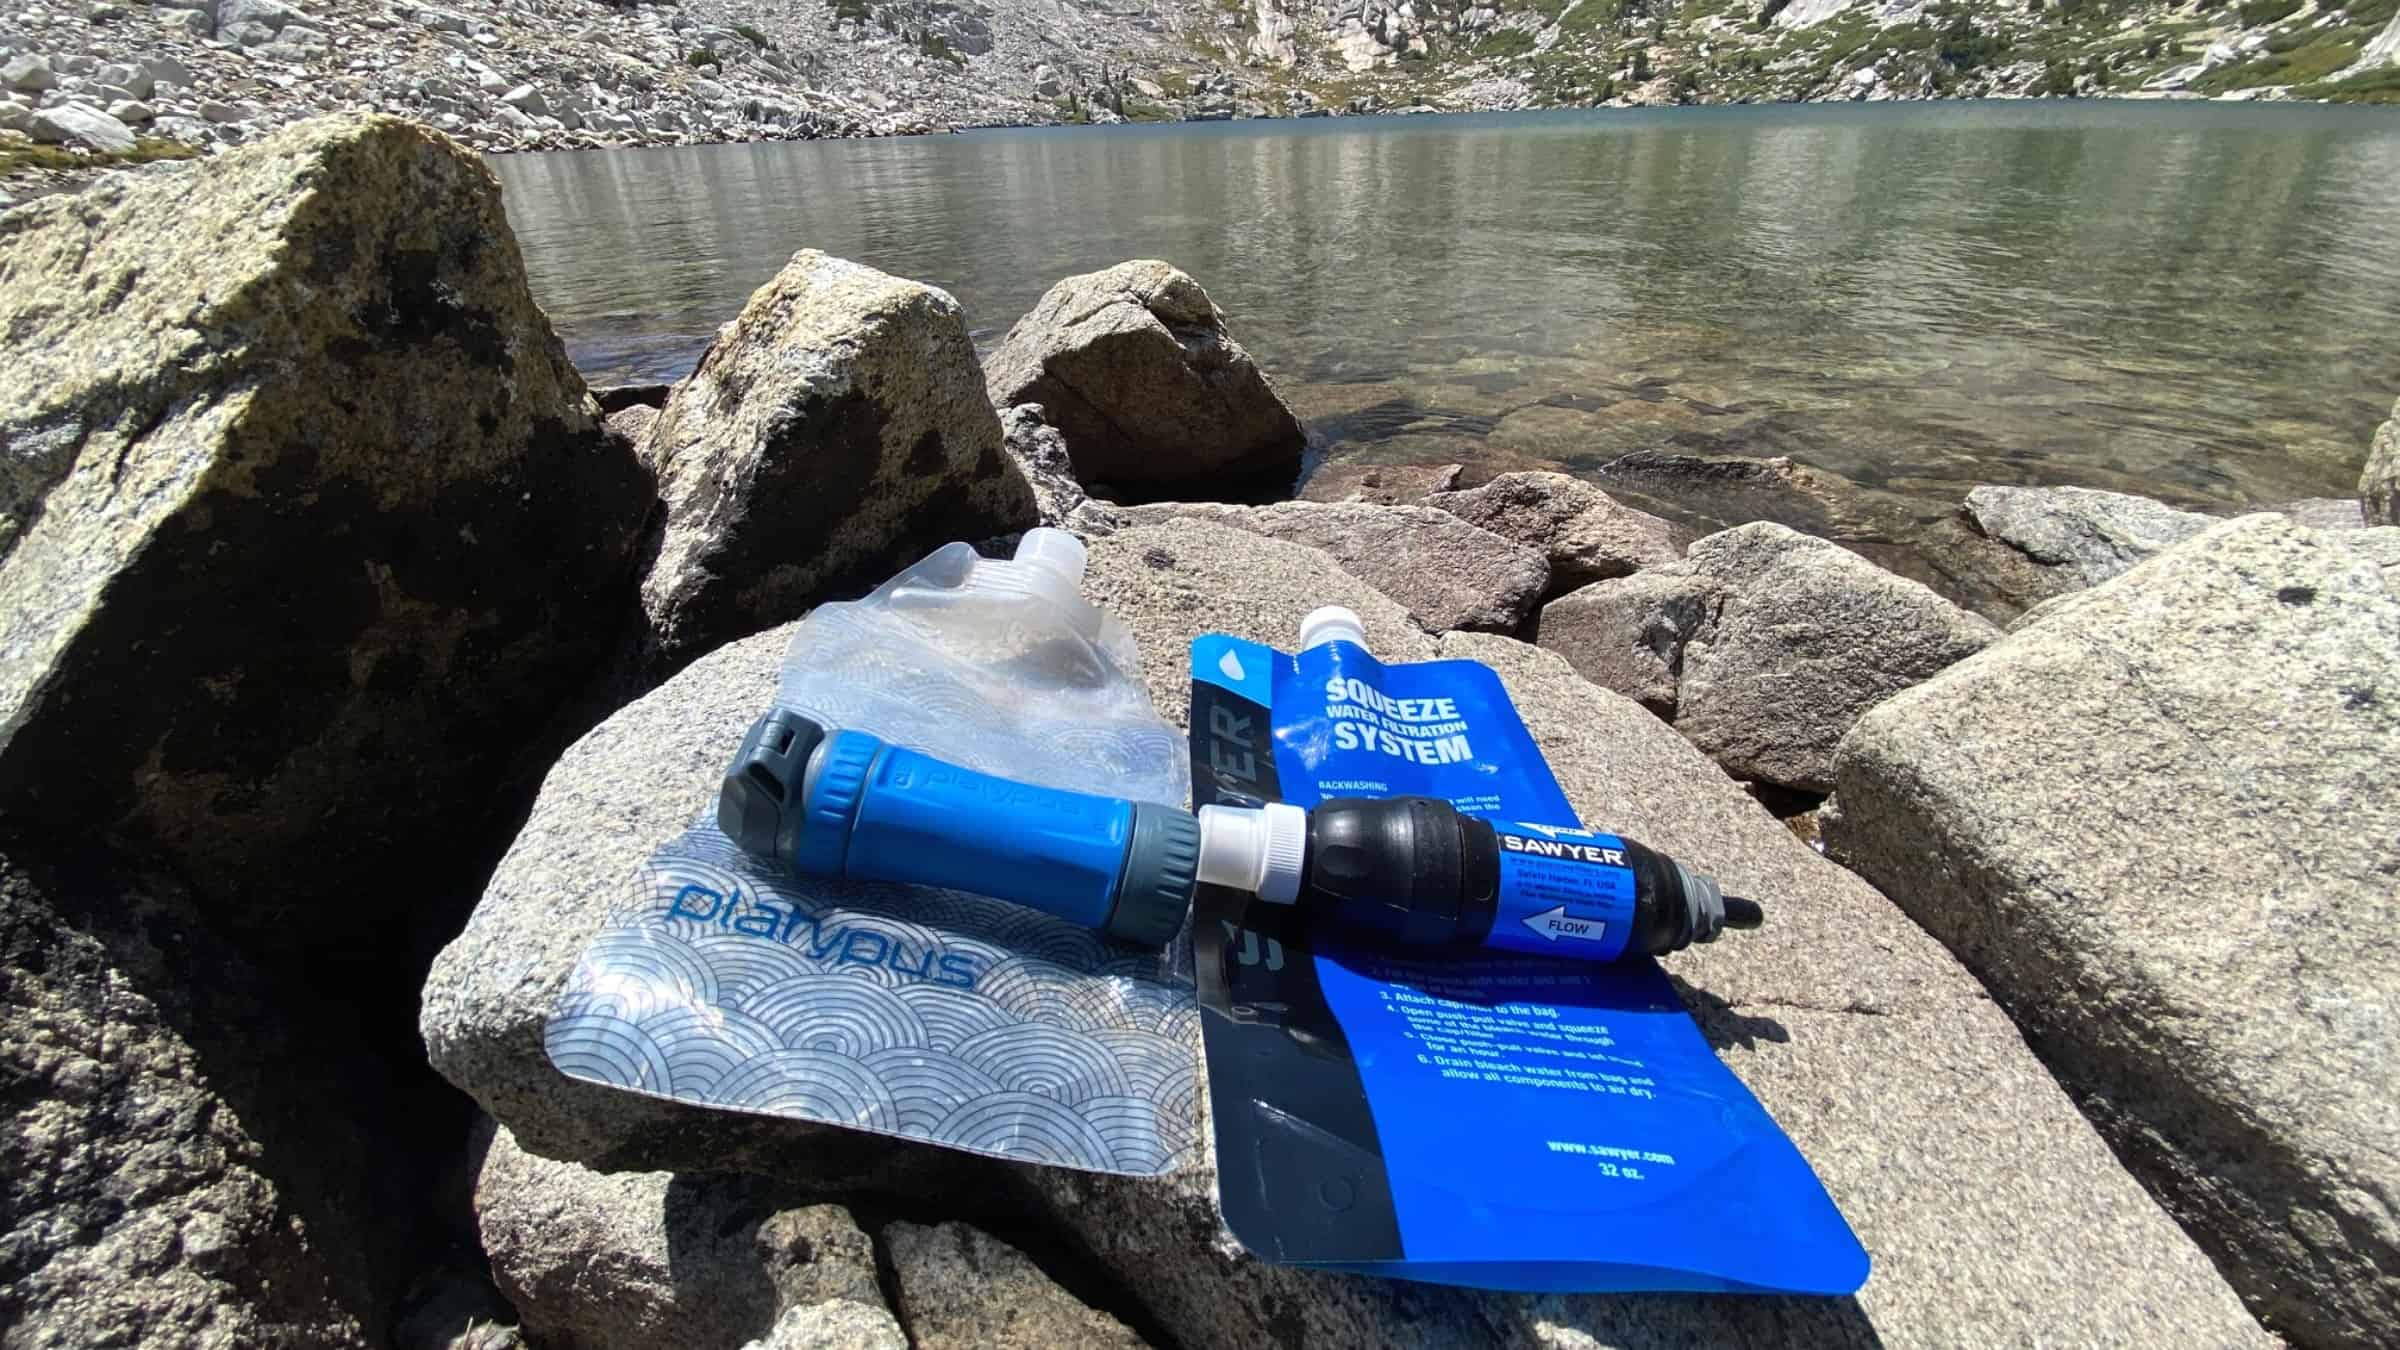 Sawyer Squeeze Water Filter Review